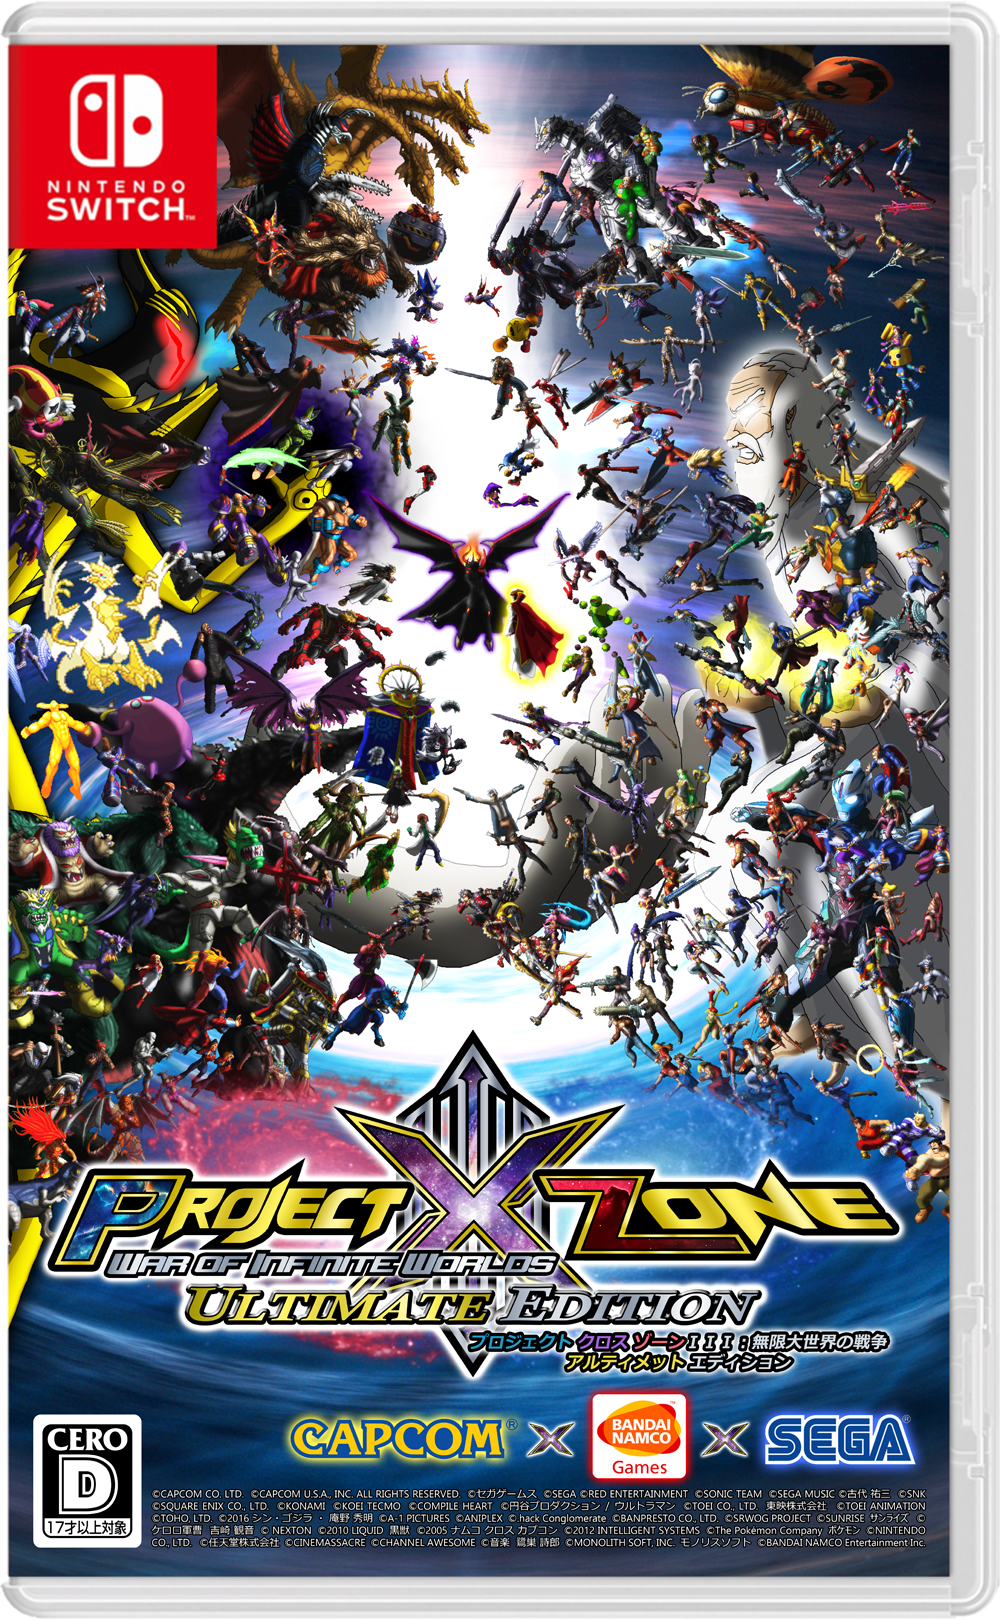 project x zone 3 download